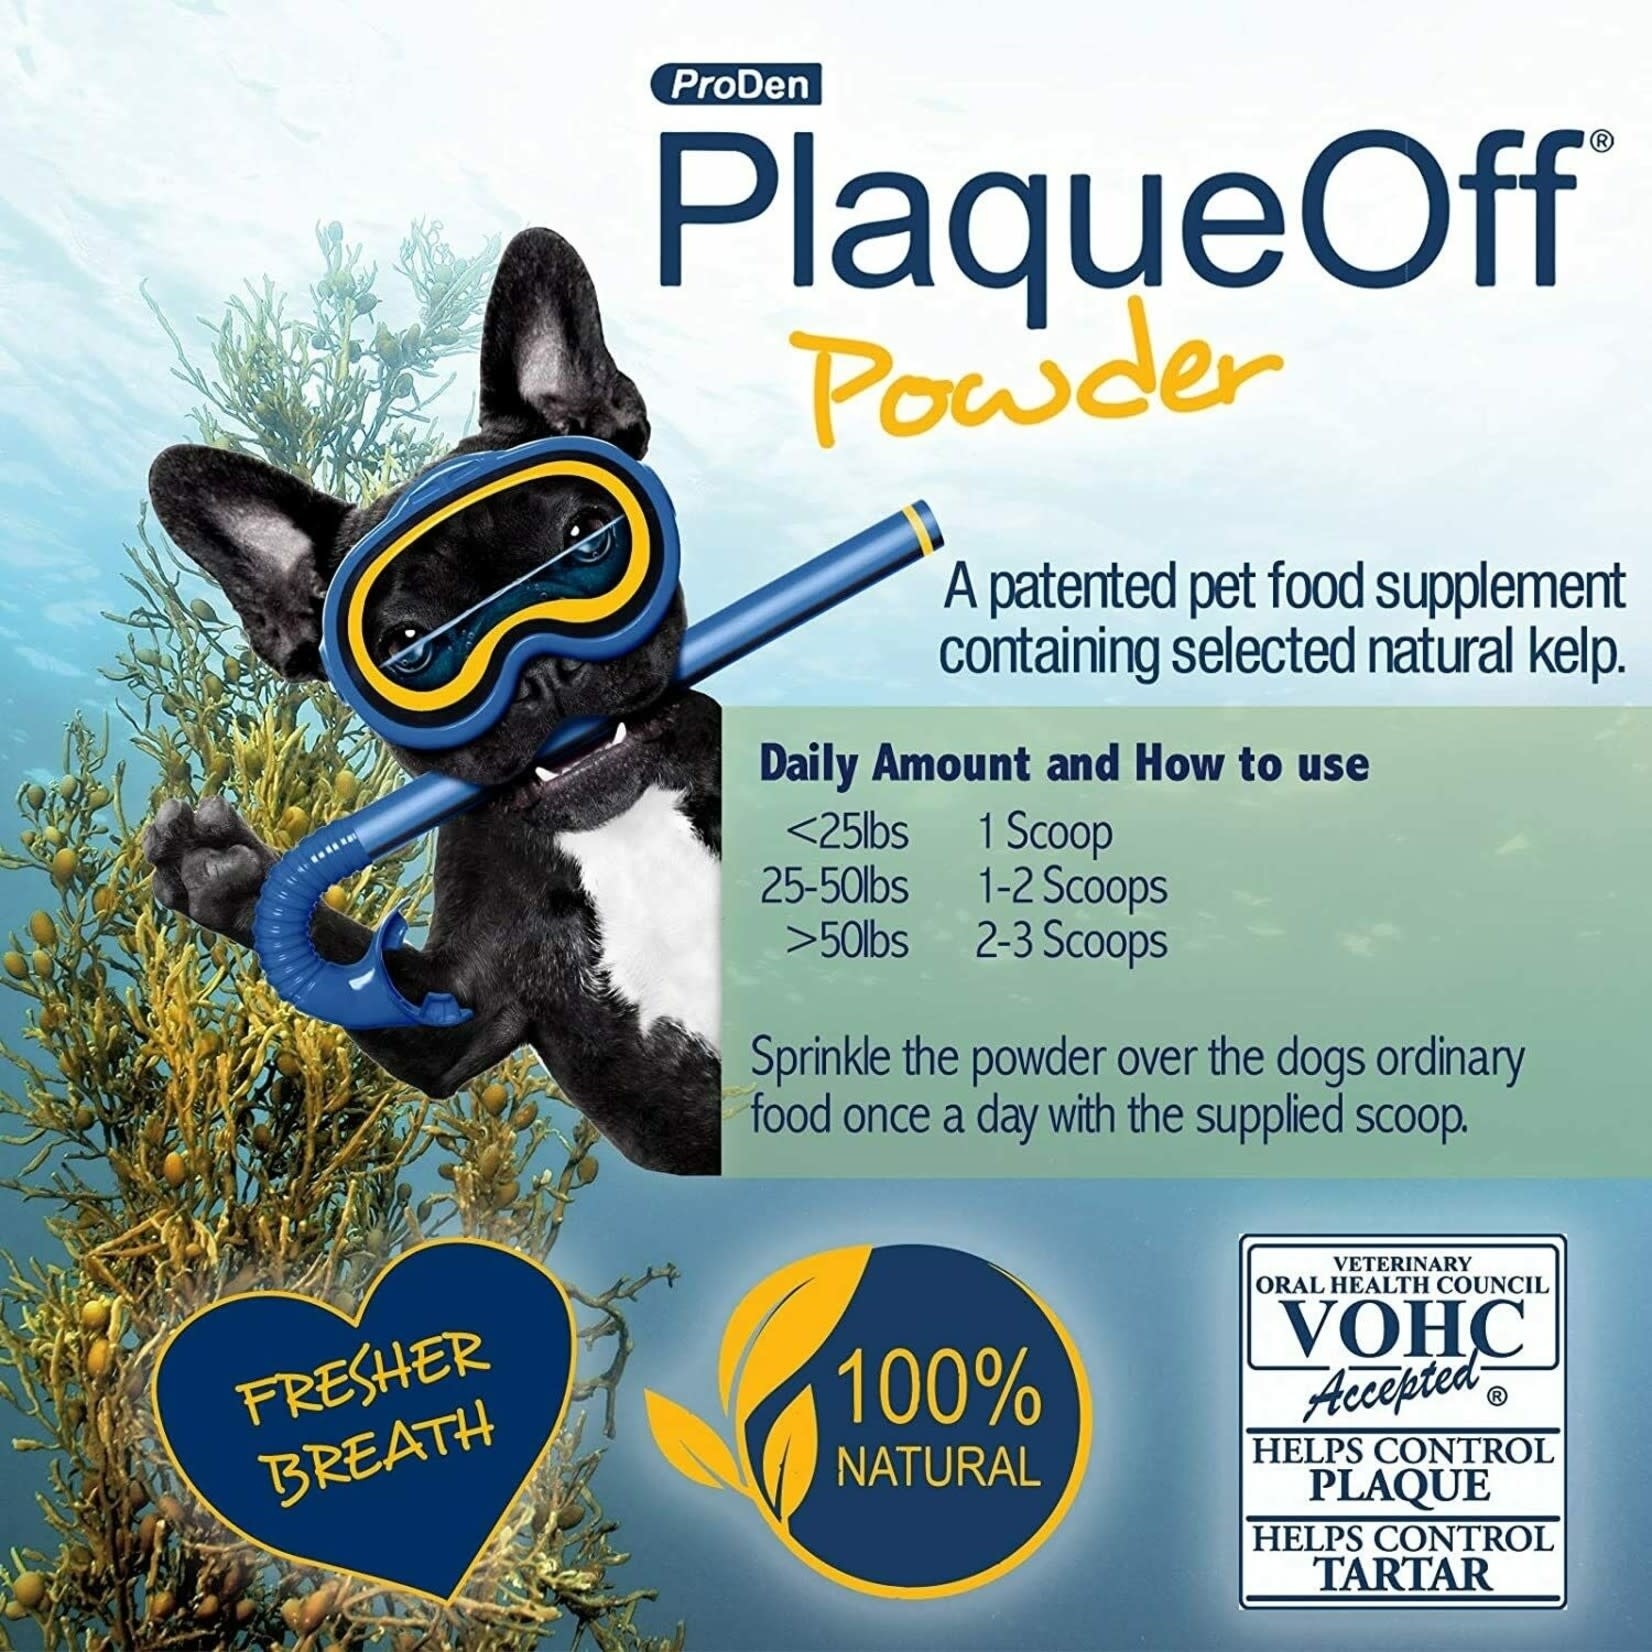 ProDen PlaqueOff Proden: PlaqueOff Seaweed Powder for Dogs